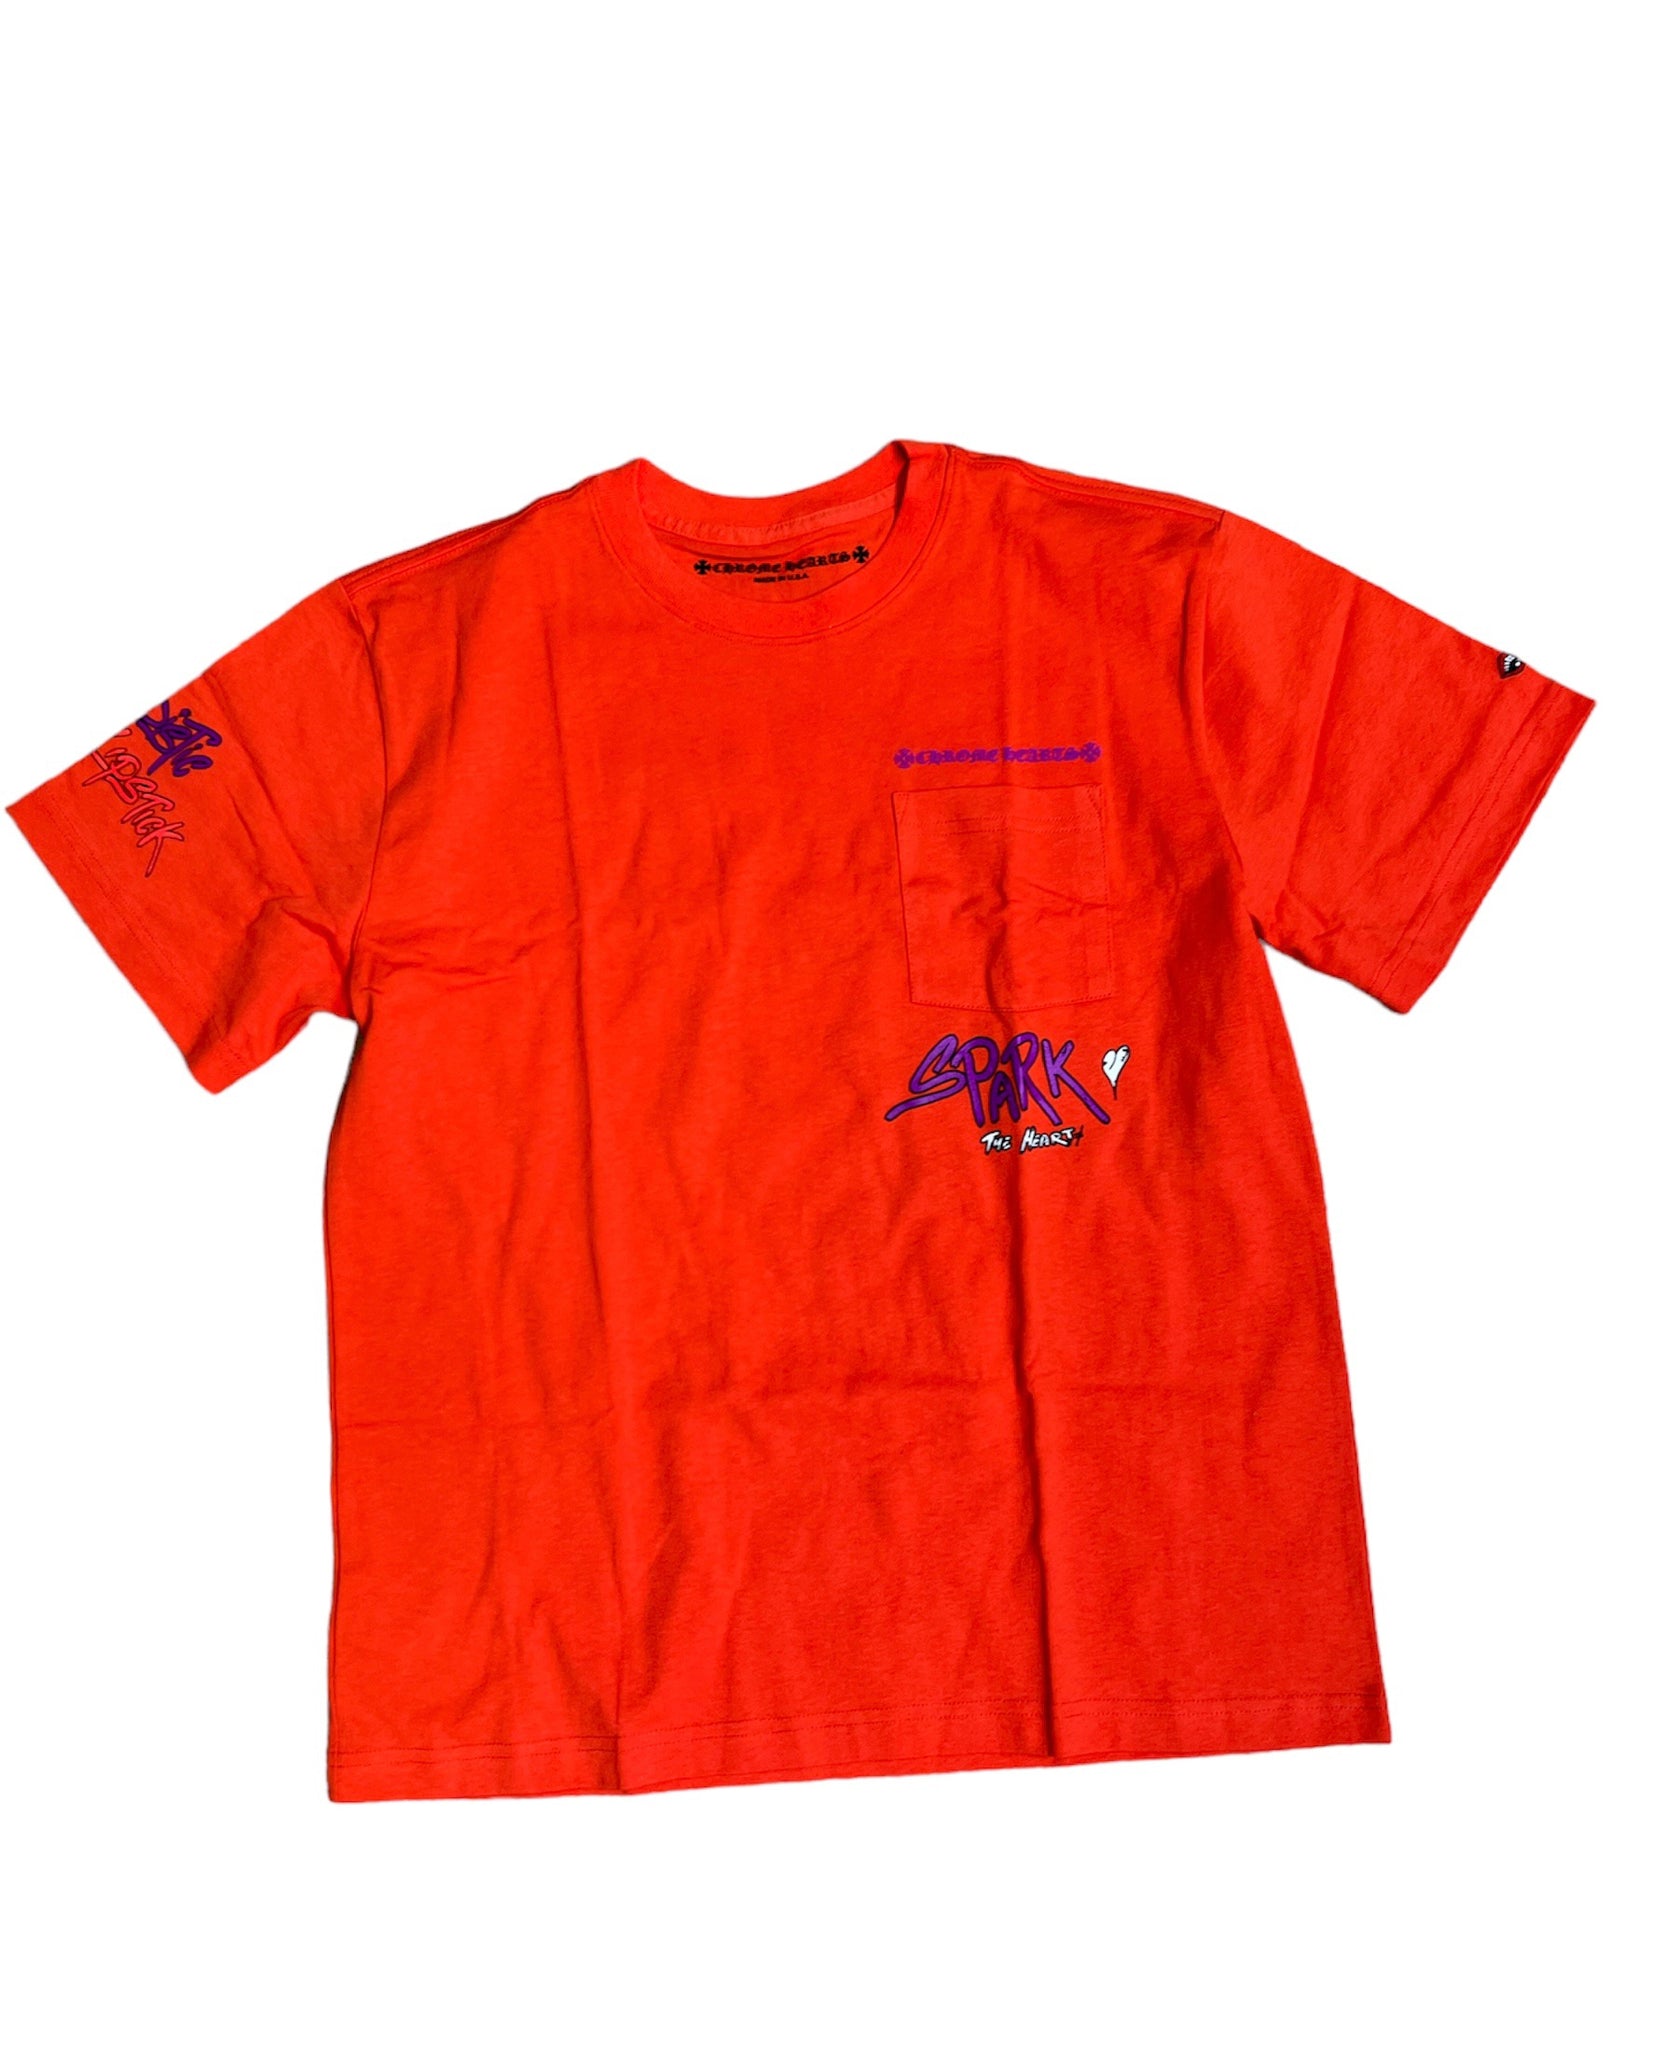 Chrome Hearts Spark The Heart Tee "Rover Red/ Purple"